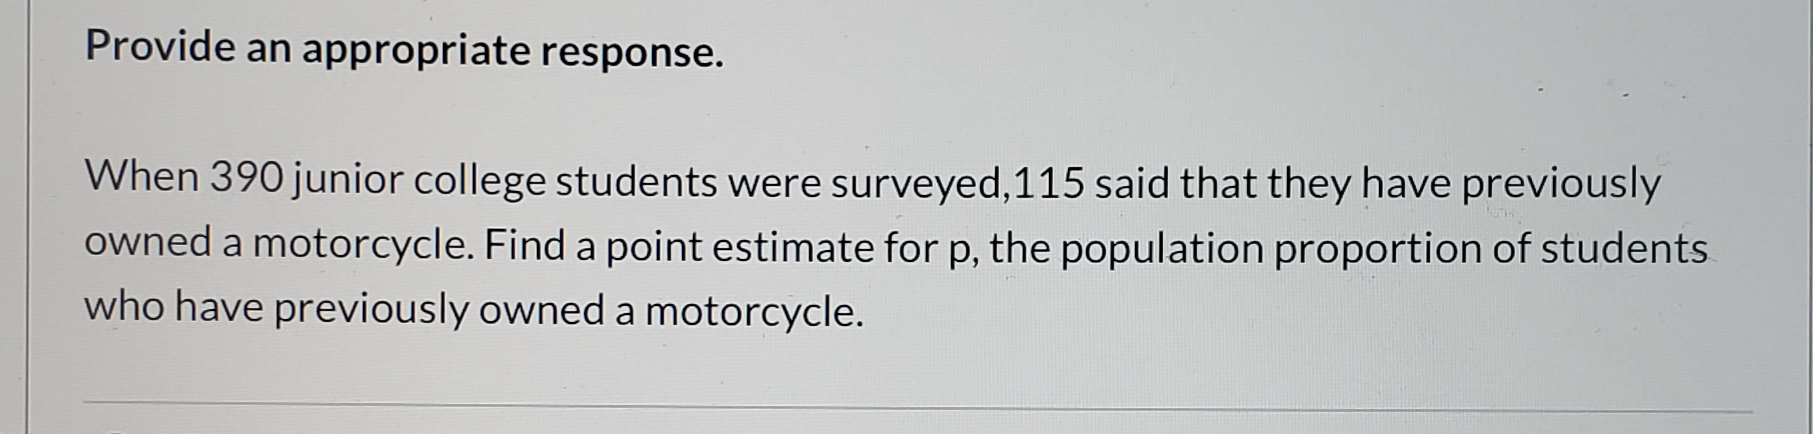 Provide an appropriate response.
When 390 junior college students were surveyed,115 said that they have previously
owned a motorcycle. Find a point estimate for p, the population proportion of students
who have previously owned a motorcycle.
